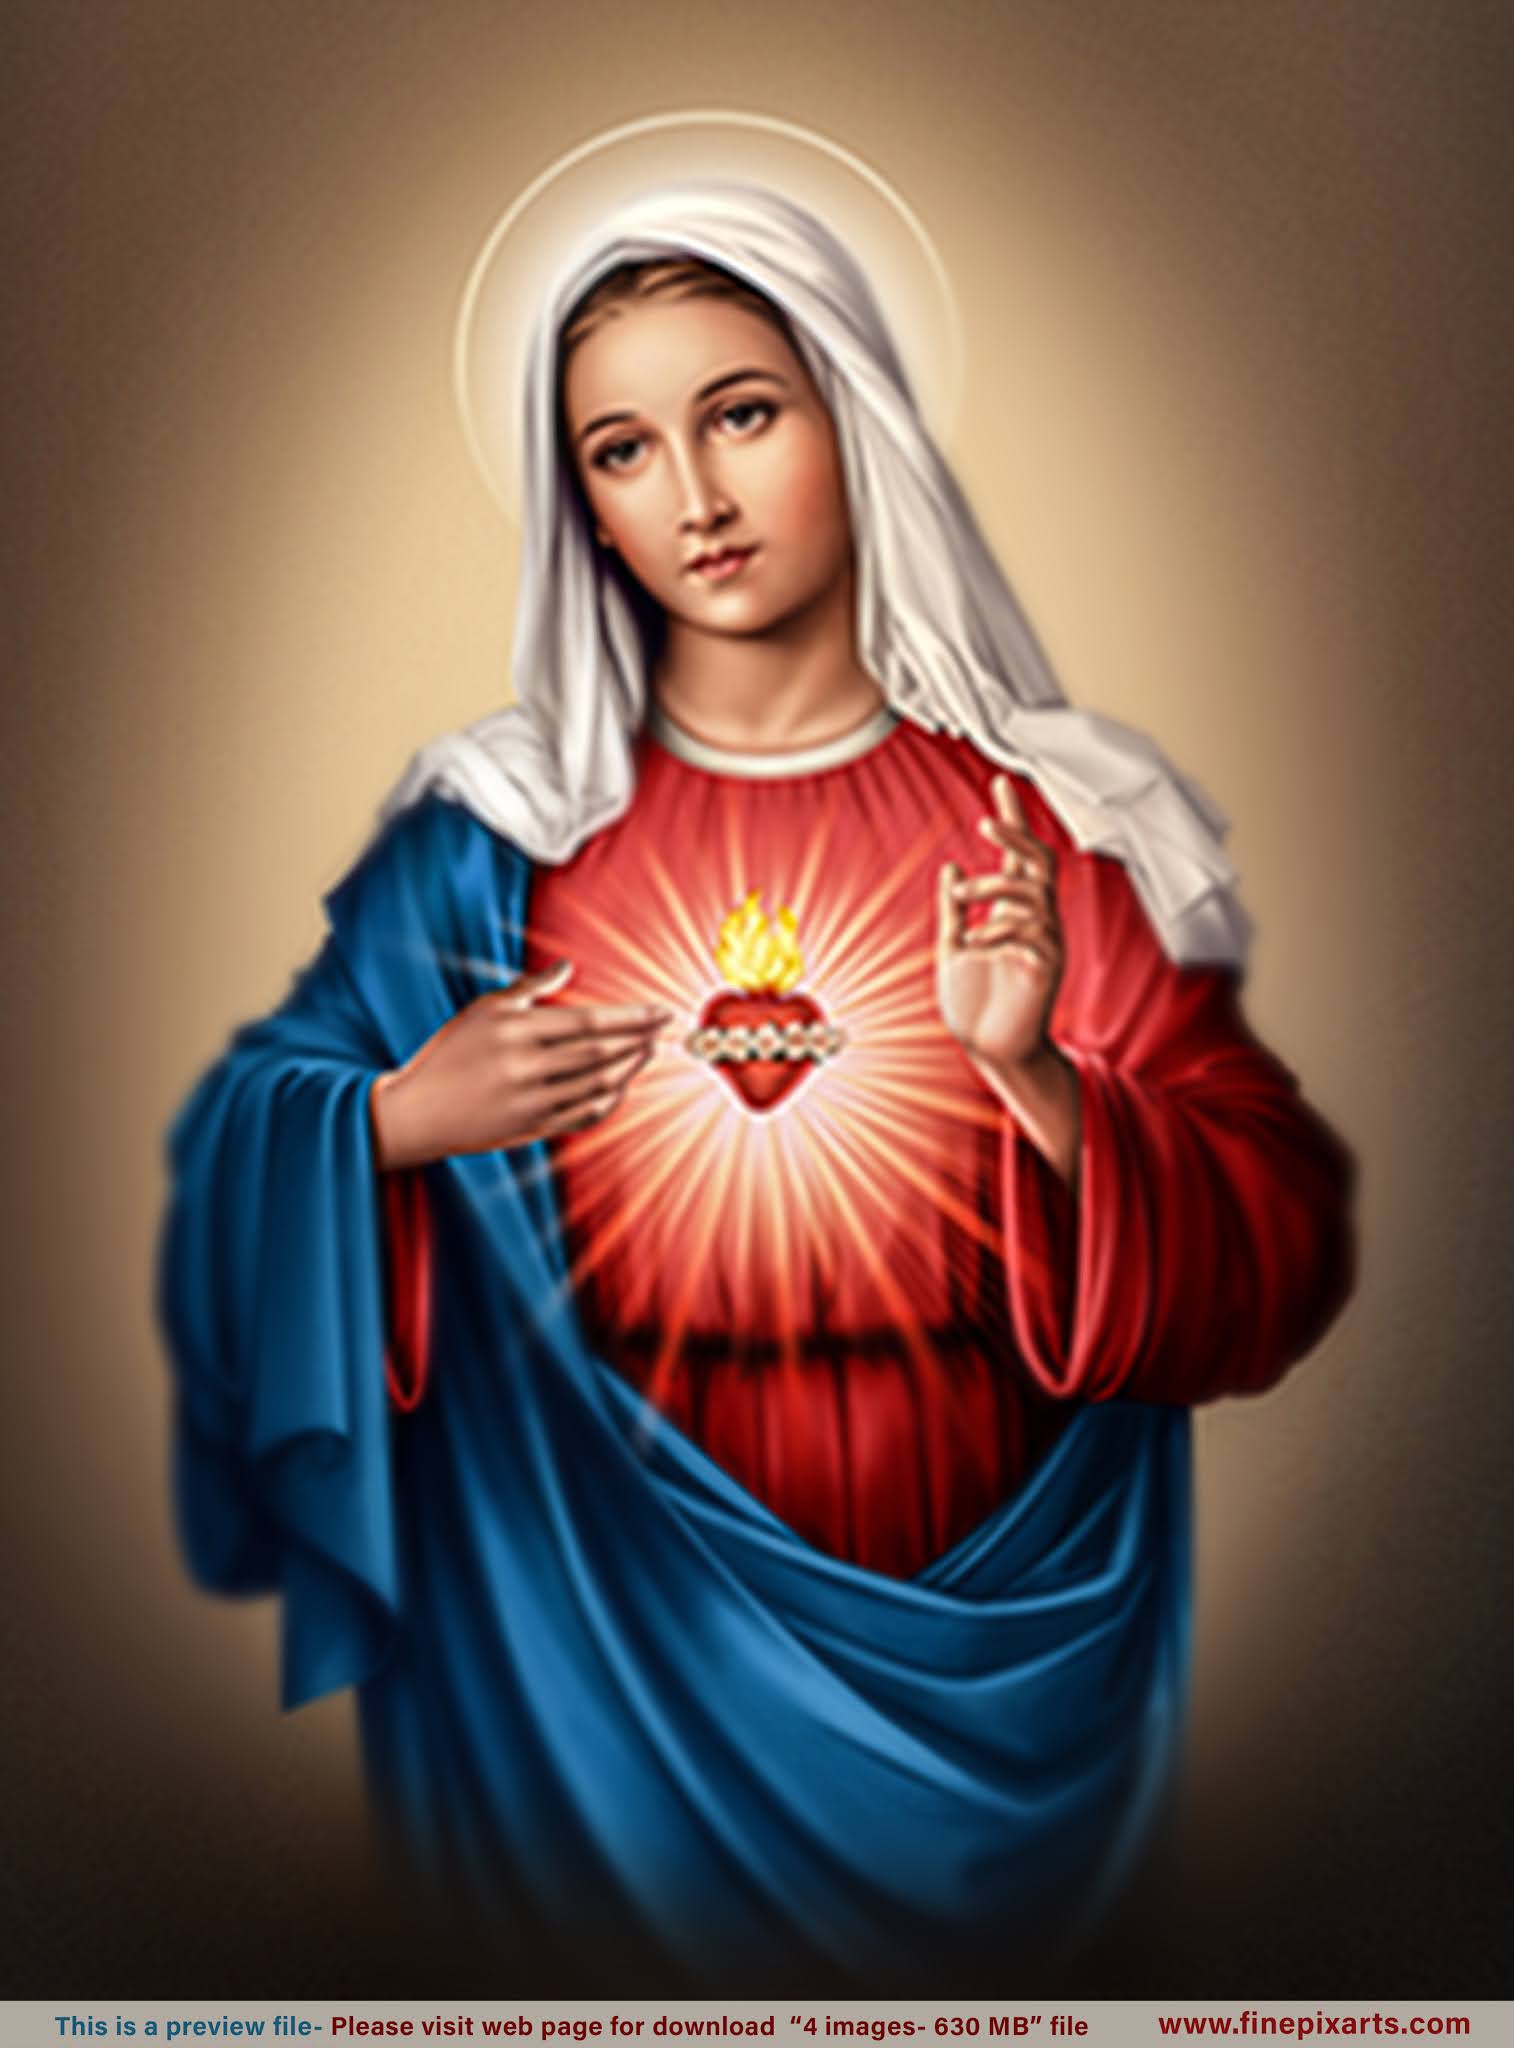 Immaculate Heart of Mary_Dark_170 MB